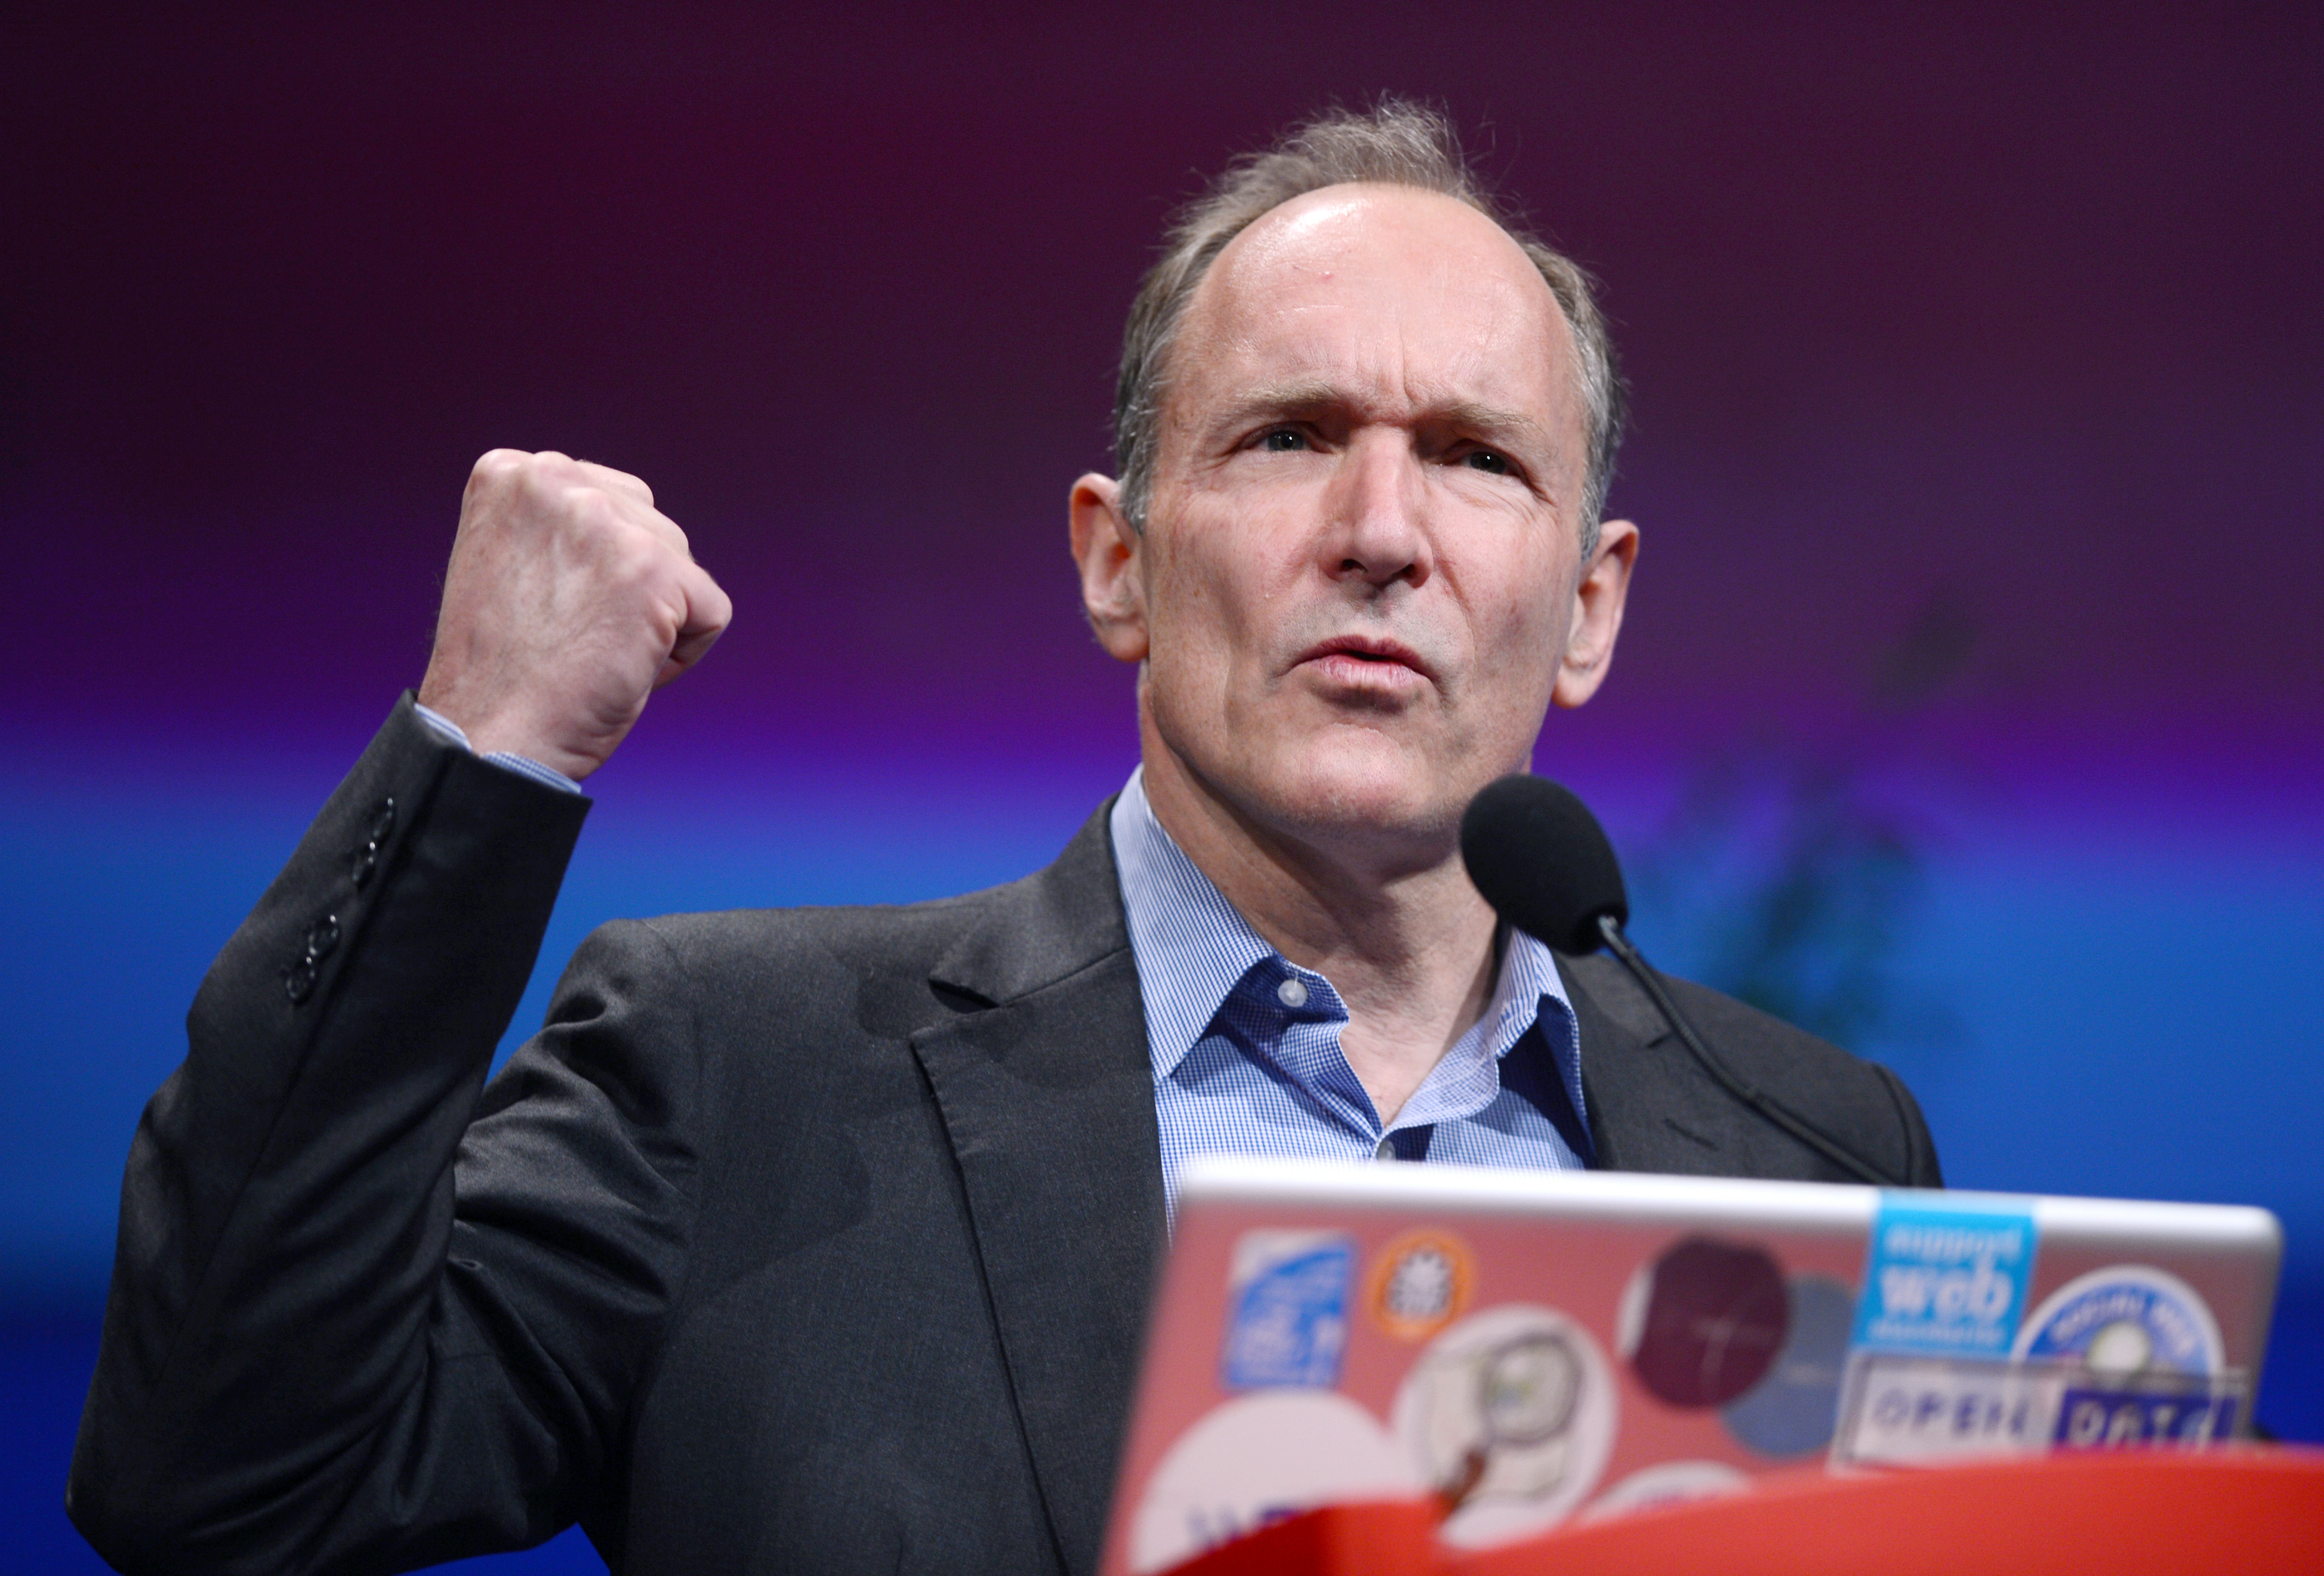 did tim berners lee make any money from the internet